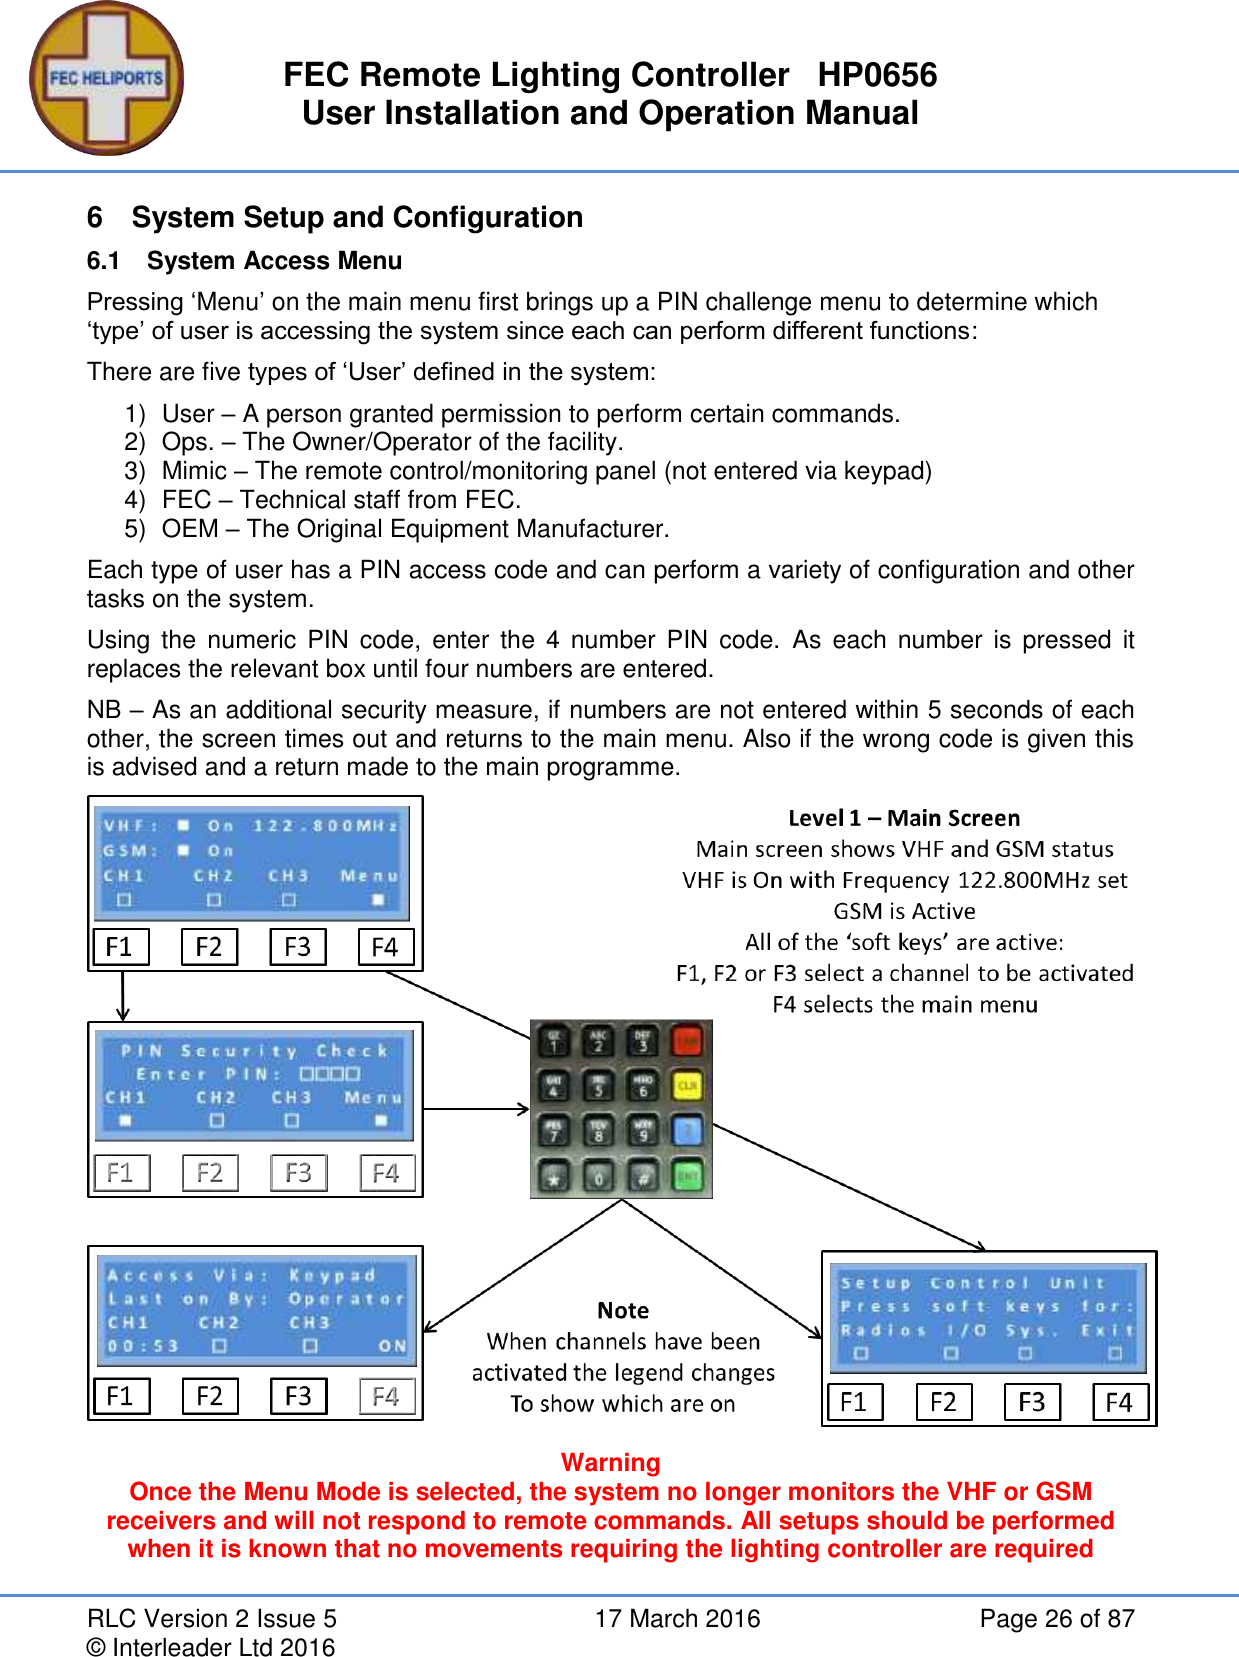 FEC Remote Lighting Controller   HP0656 User Installation and Operation Manual RLC Version 2 Issue 5  17 March 2016  Page 26 of 87 © Interleader Ltd 2016 6  System Setup and Configuration 6.1  System Access Menu Pressing ‘Menu’ on the main menu first brings up a PIN challenge menu to determine which ‘type’ of user is accessing the system since each can perform different functions: There are five types of ‘User’ defined in the system: 1)  User – A person granted permission to perform certain commands. 2)  Ops. – The Owner/Operator of the facility. 3)  Mimic – The remote control/monitoring panel (not entered via keypad) 4)  FEC – Technical staff from FEC. 5)  OEM – The Original Equipment Manufacturer. Each type of user has a PIN access code and can perform a variety of configuration and other tasks on the system. Using the  numeric PIN  code,  enter  the  4  number  PIN  code.  As each  number  is pressed  it replaces the relevant box until four numbers are entered. NB – As an additional security measure, if numbers are not entered within 5 seconds of each other, the screen times out and returns to the main menu. Also if the wrong code is given this is advised and a return made to the main programme.  Warning Once the Menu Mode is selected, the system no longer monitors the VHF or GSM receivers and will not respond to remote commands. All setups should be performed when it is known that no movements requiring the lighting controller are required  